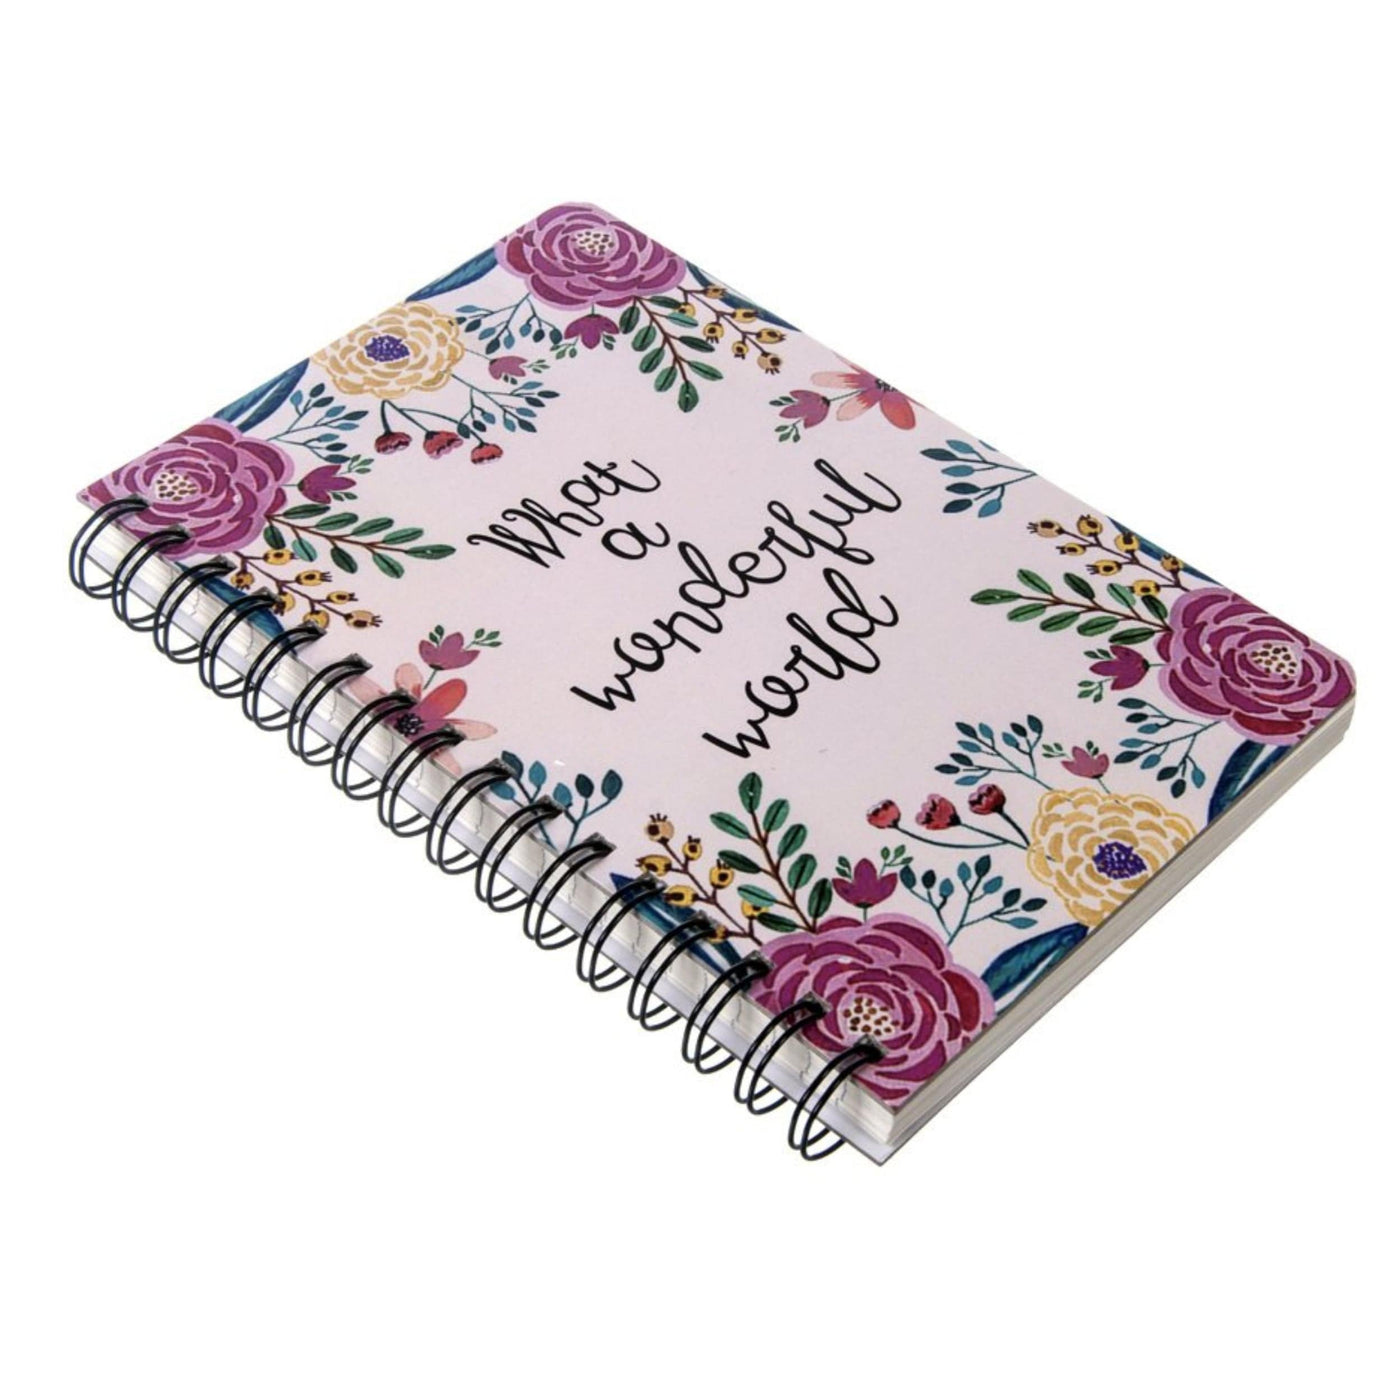 Gifts of Love Viva Notebook A5 - What a Wonderful World